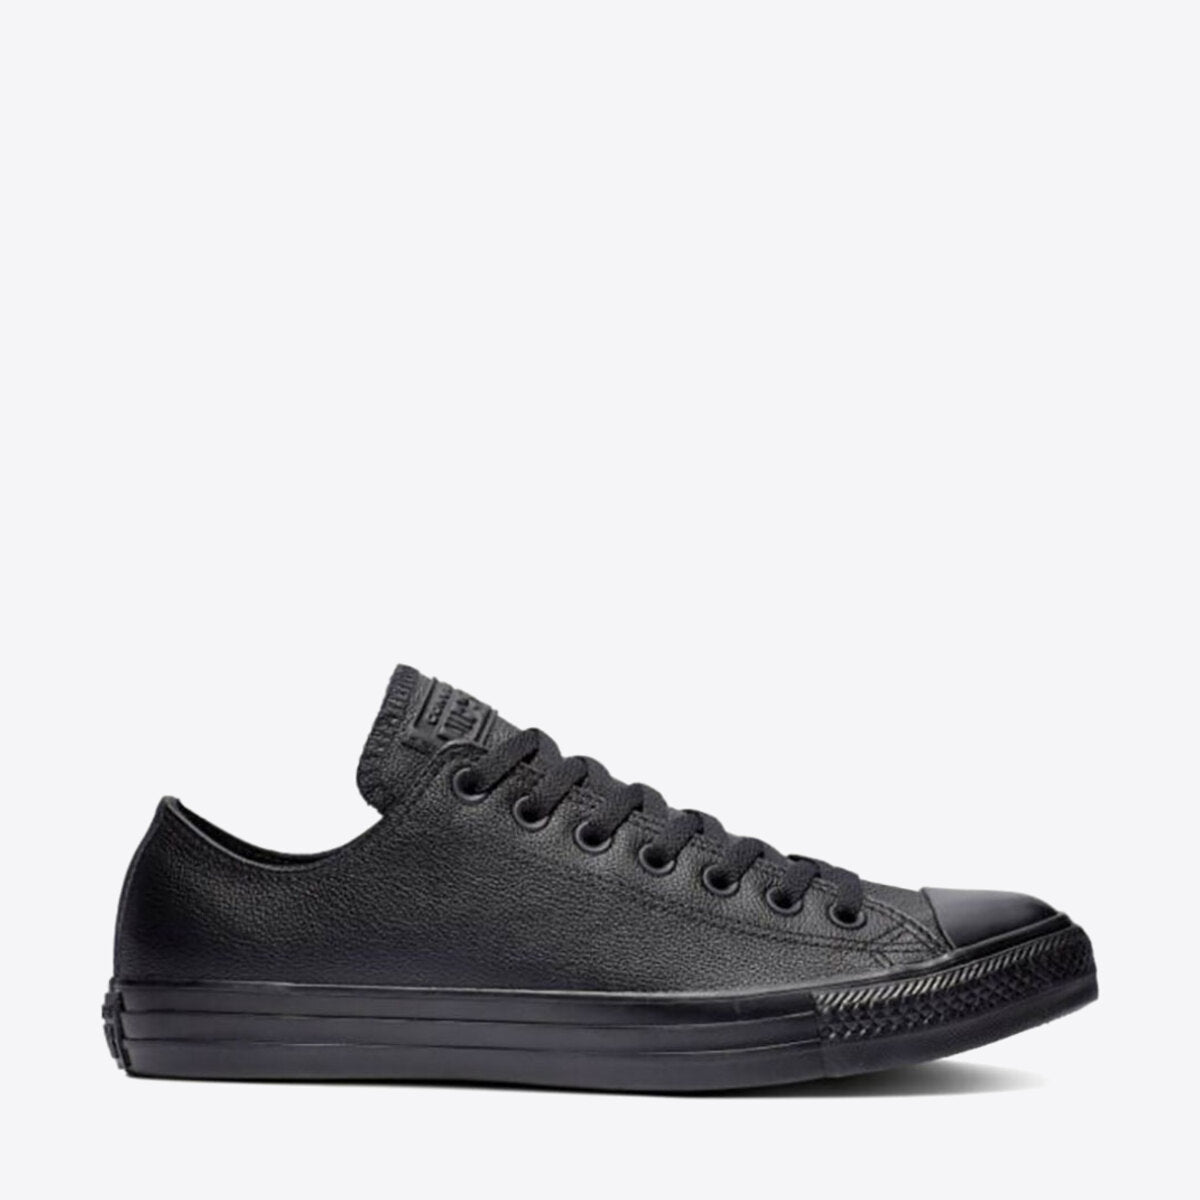 CONVERSE Chuck Taylor All Star Leather Low Black Mono - Image 2